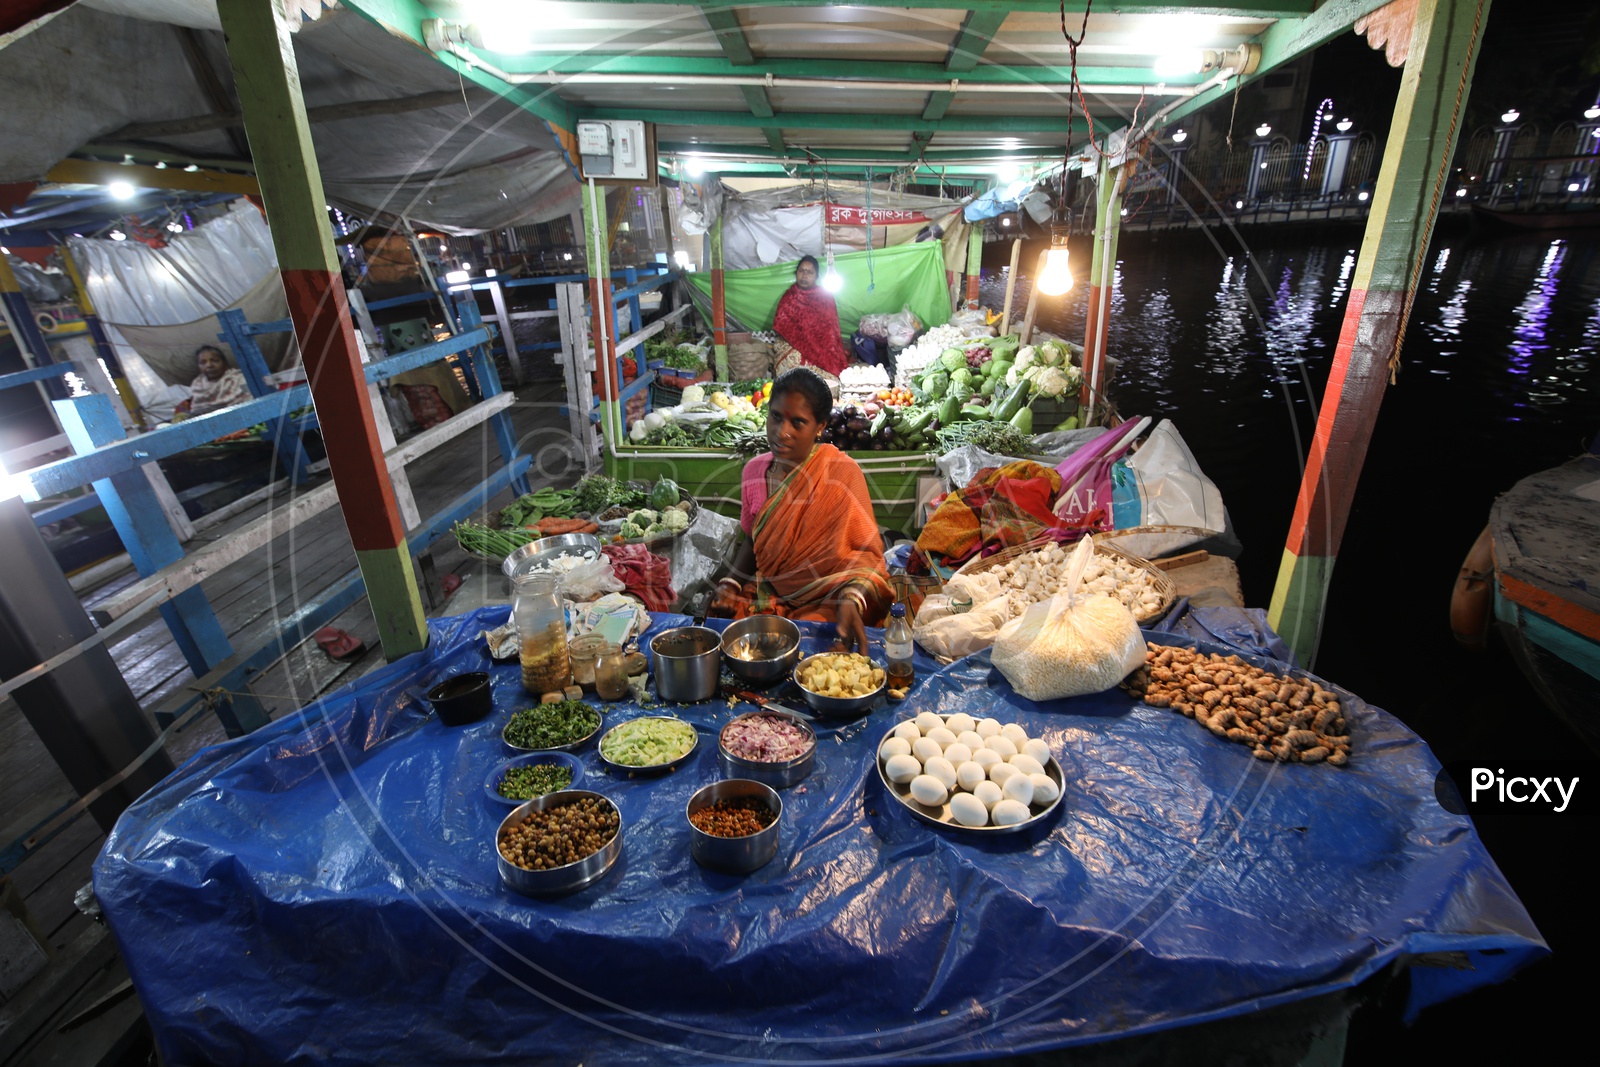 A Woman Street Food Vendor In a Stall At The Floating Market